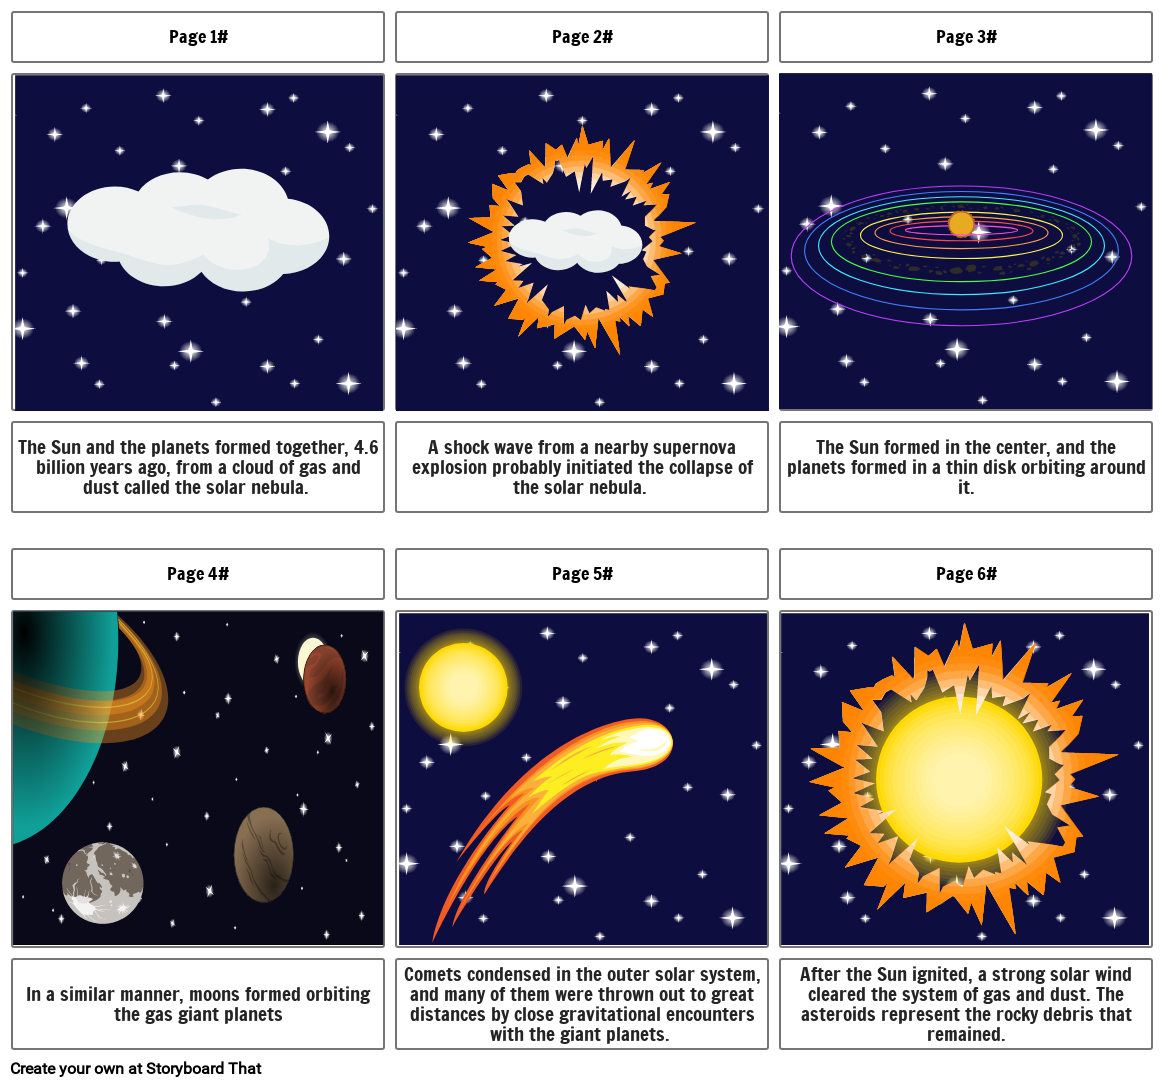 what hypothesis explains the formation of the solar system